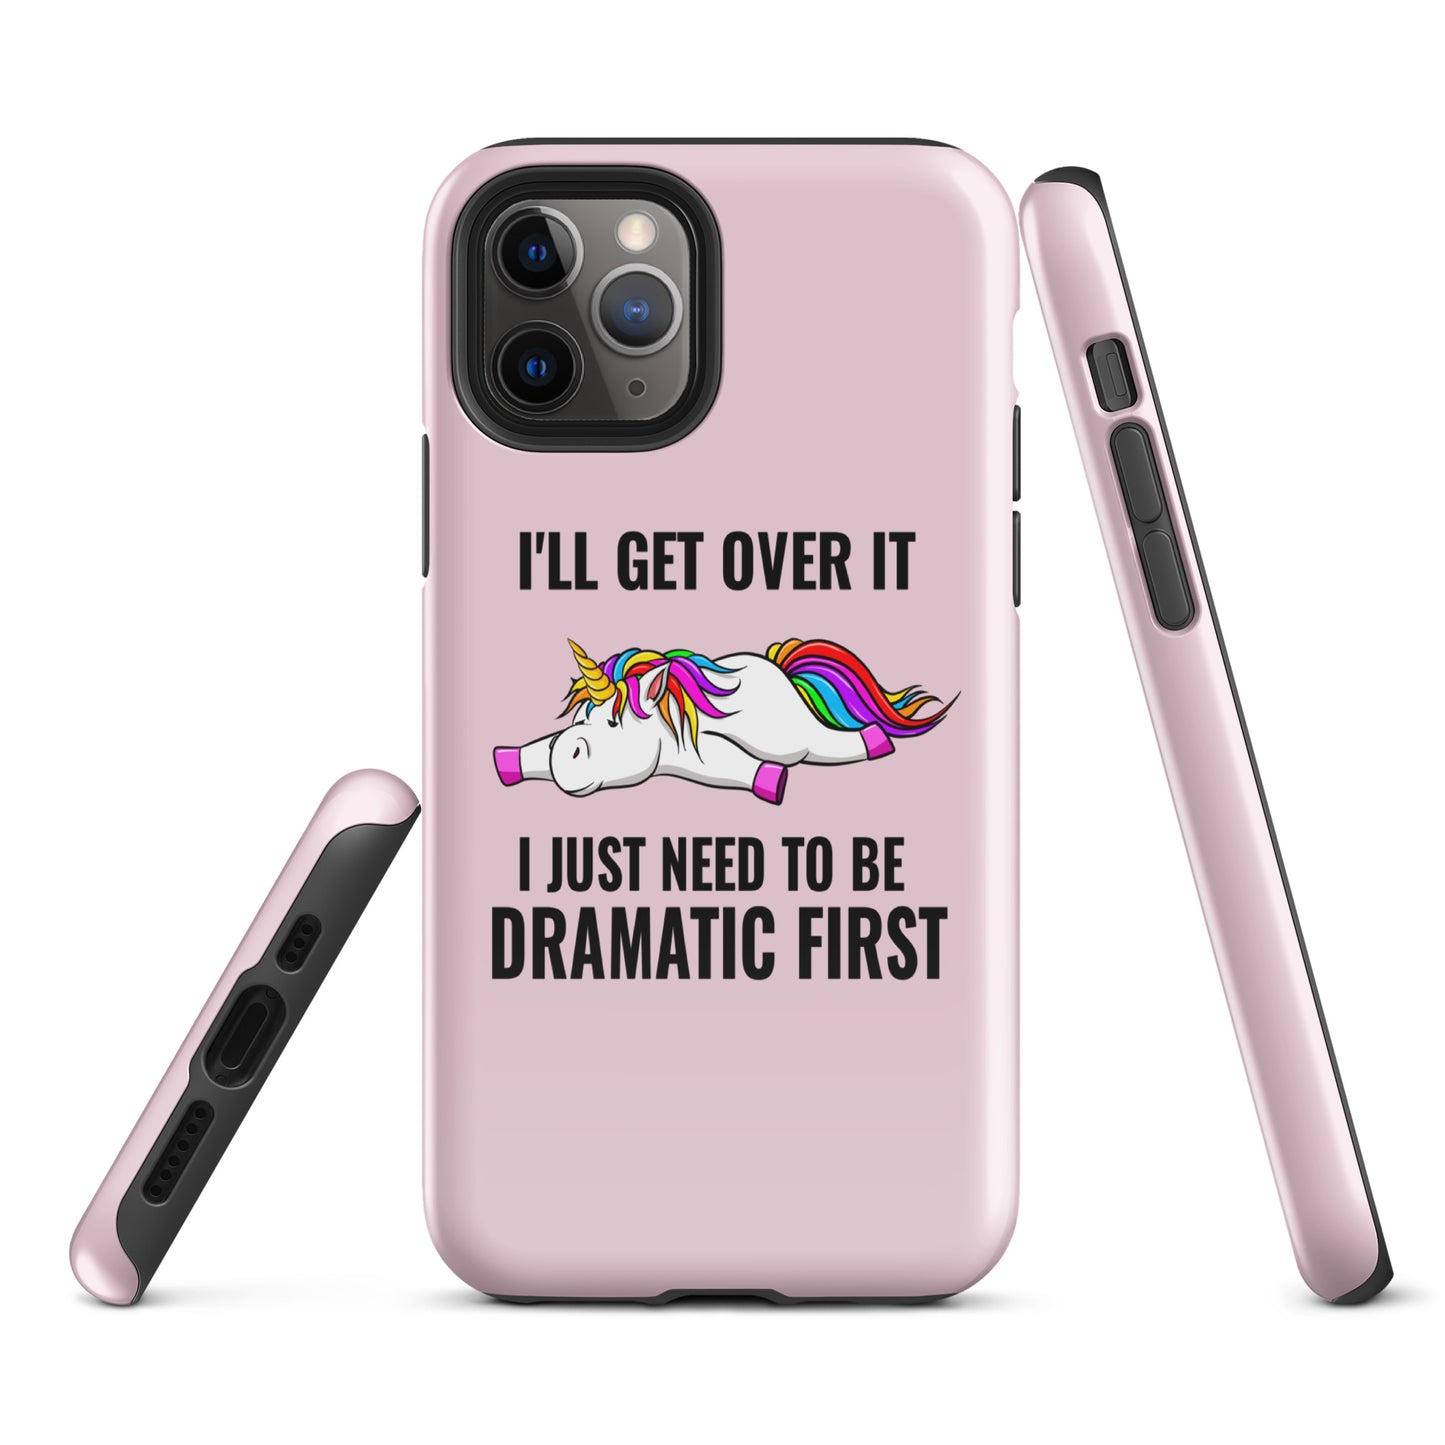 I'll Get Over It, I Just Need to be Dramatic First: Whimsical Unicorn Case for iPhone®